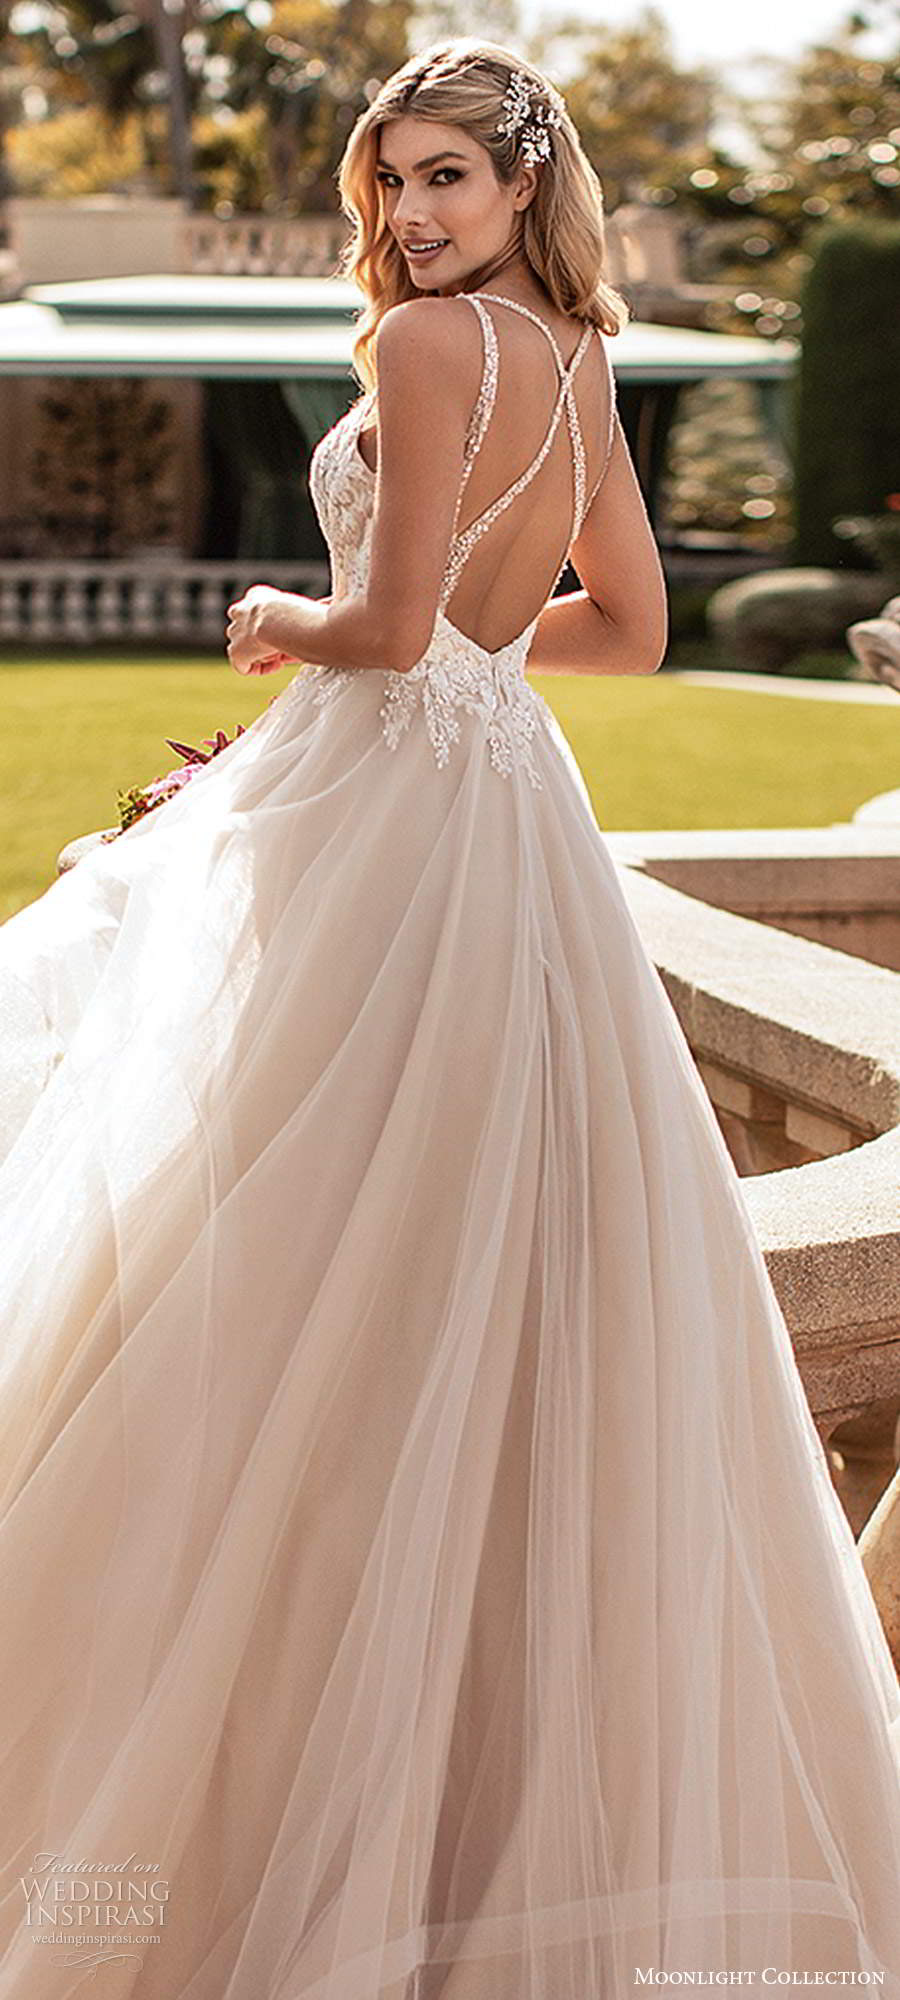 moonlight collection fall 2020 bridal sleeveless beaded straps sweetheart neckline embellished bodice a line ball gown wedding dress tiered skirt chapel train (4) zbv